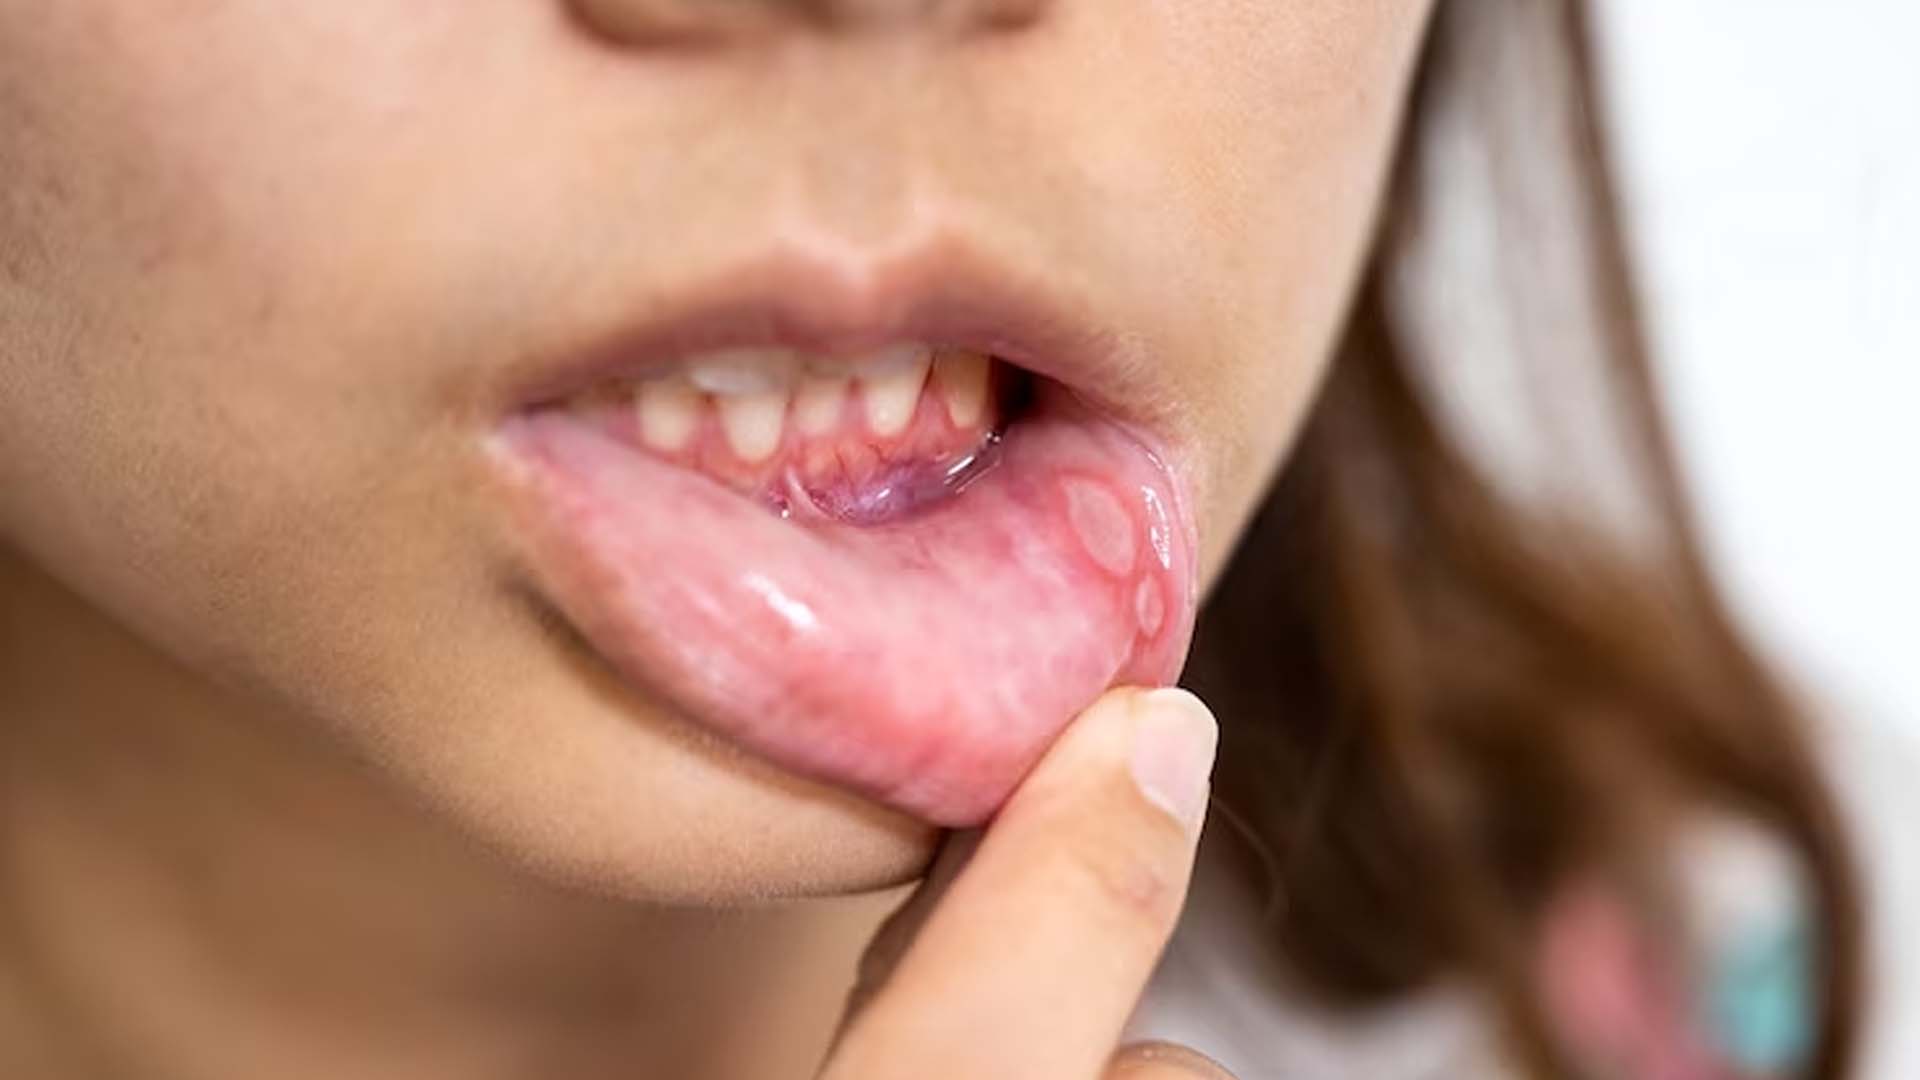 Can Stress Cause Mouth Ulcers?